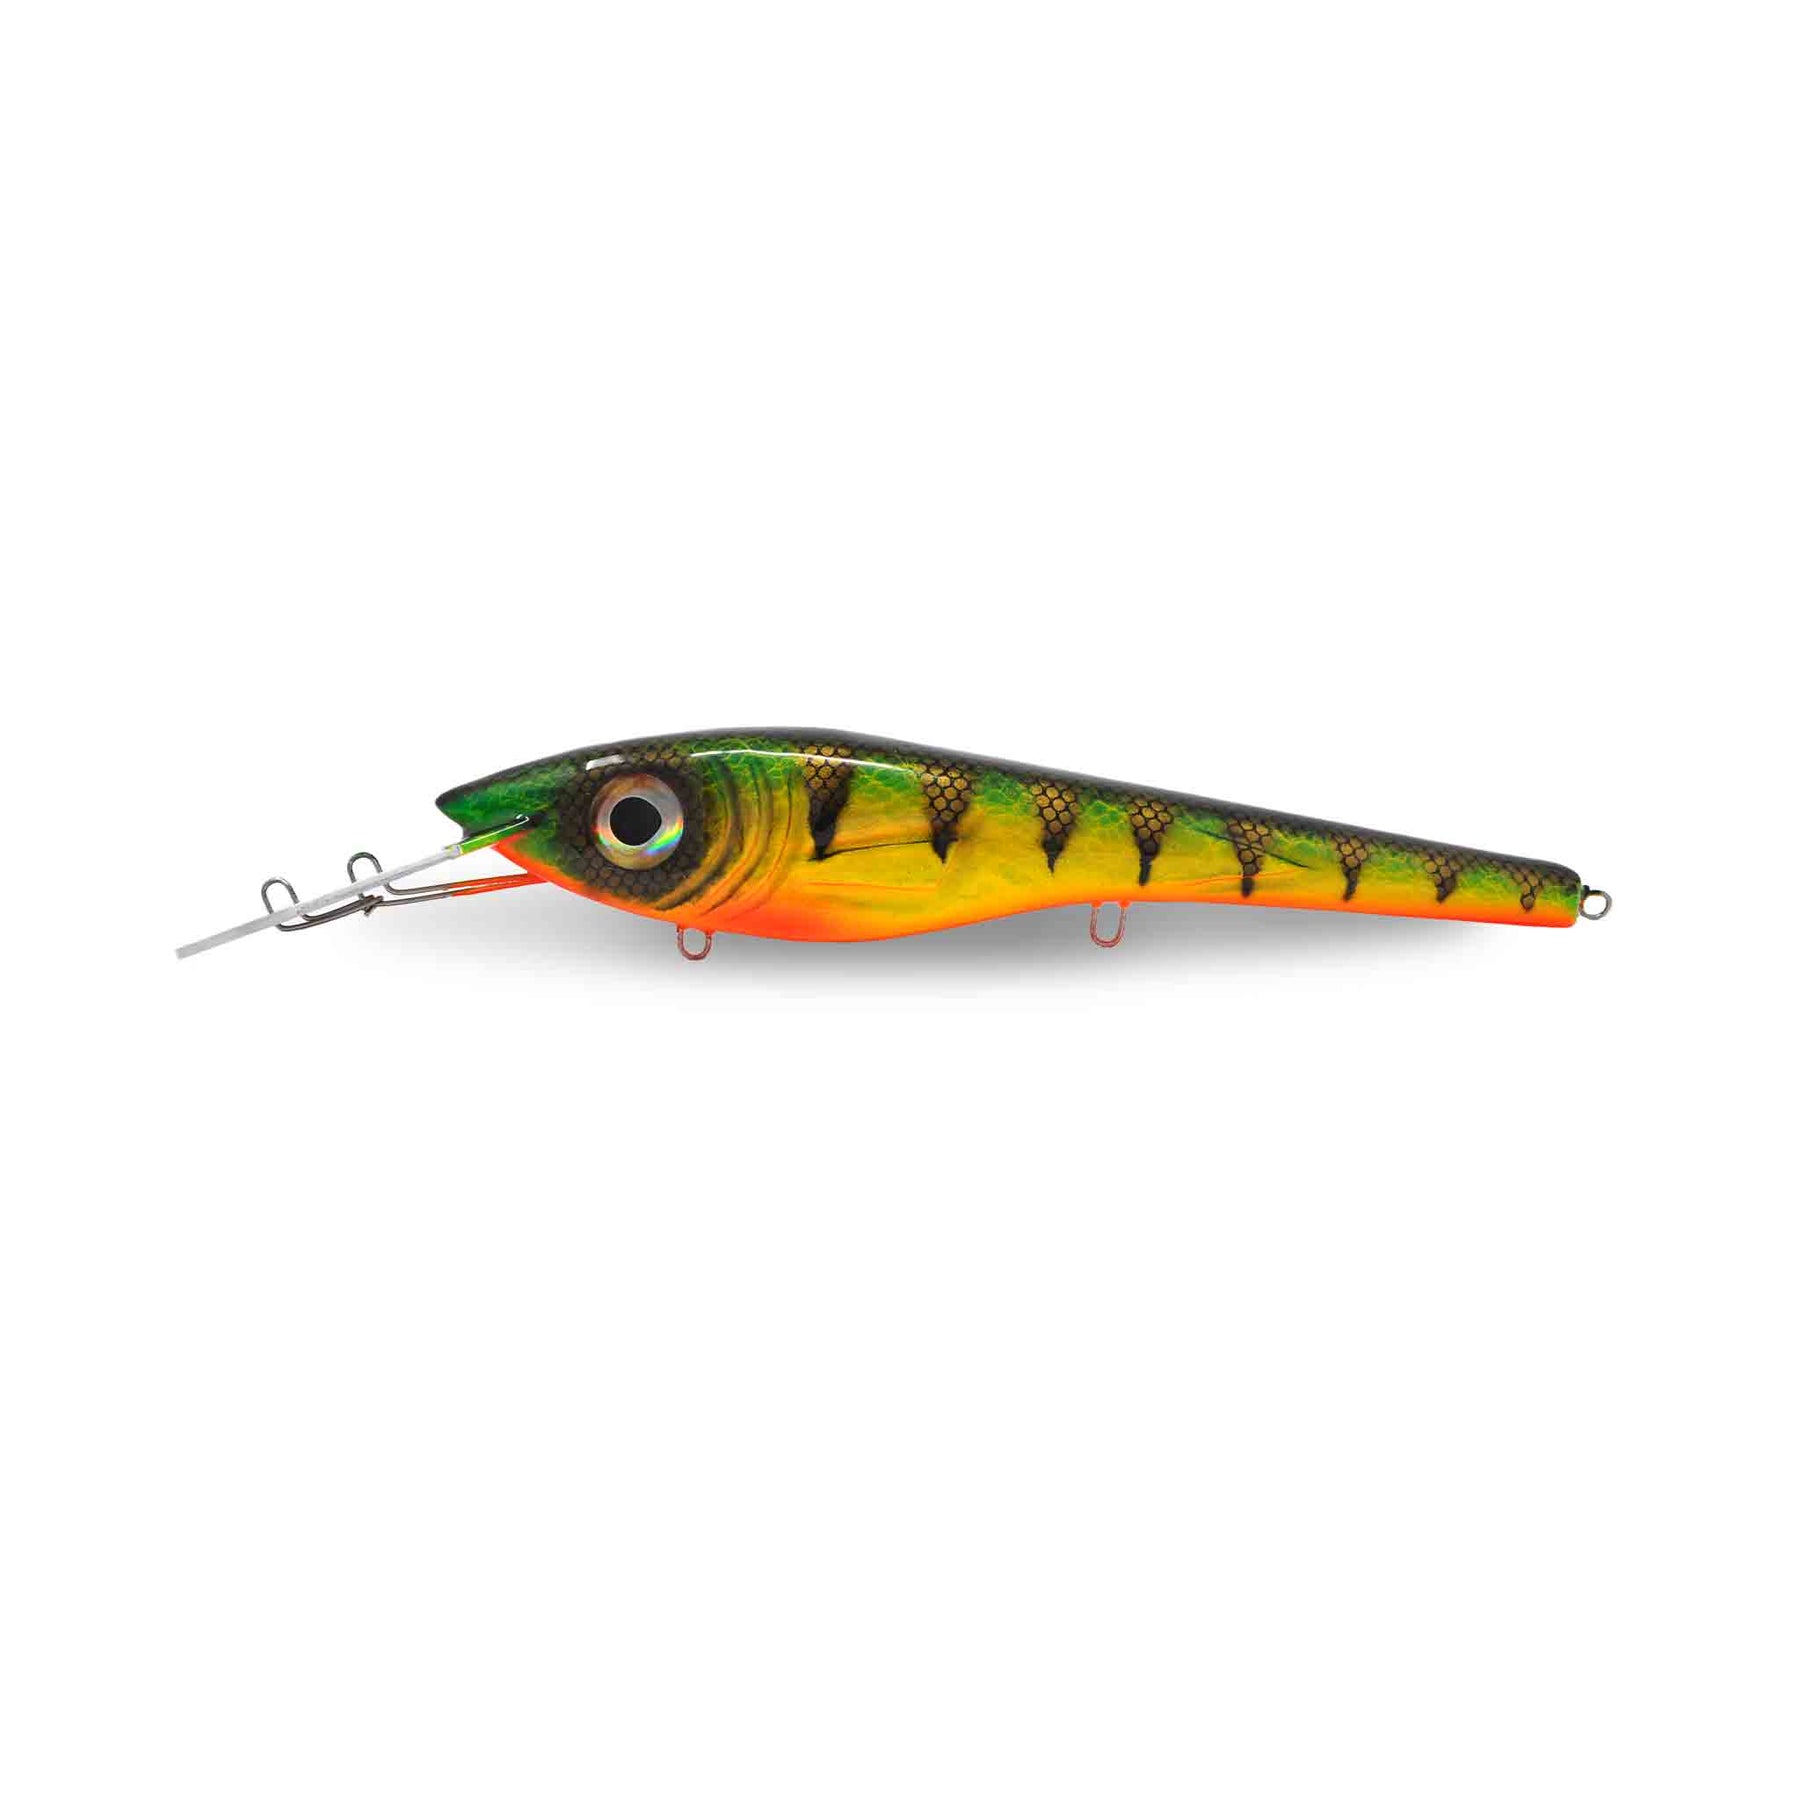 View of Crankbaits Scorpion MadBait 13'' Crankbait Fire Tiger available at EZOKO Pike and Musky Shop